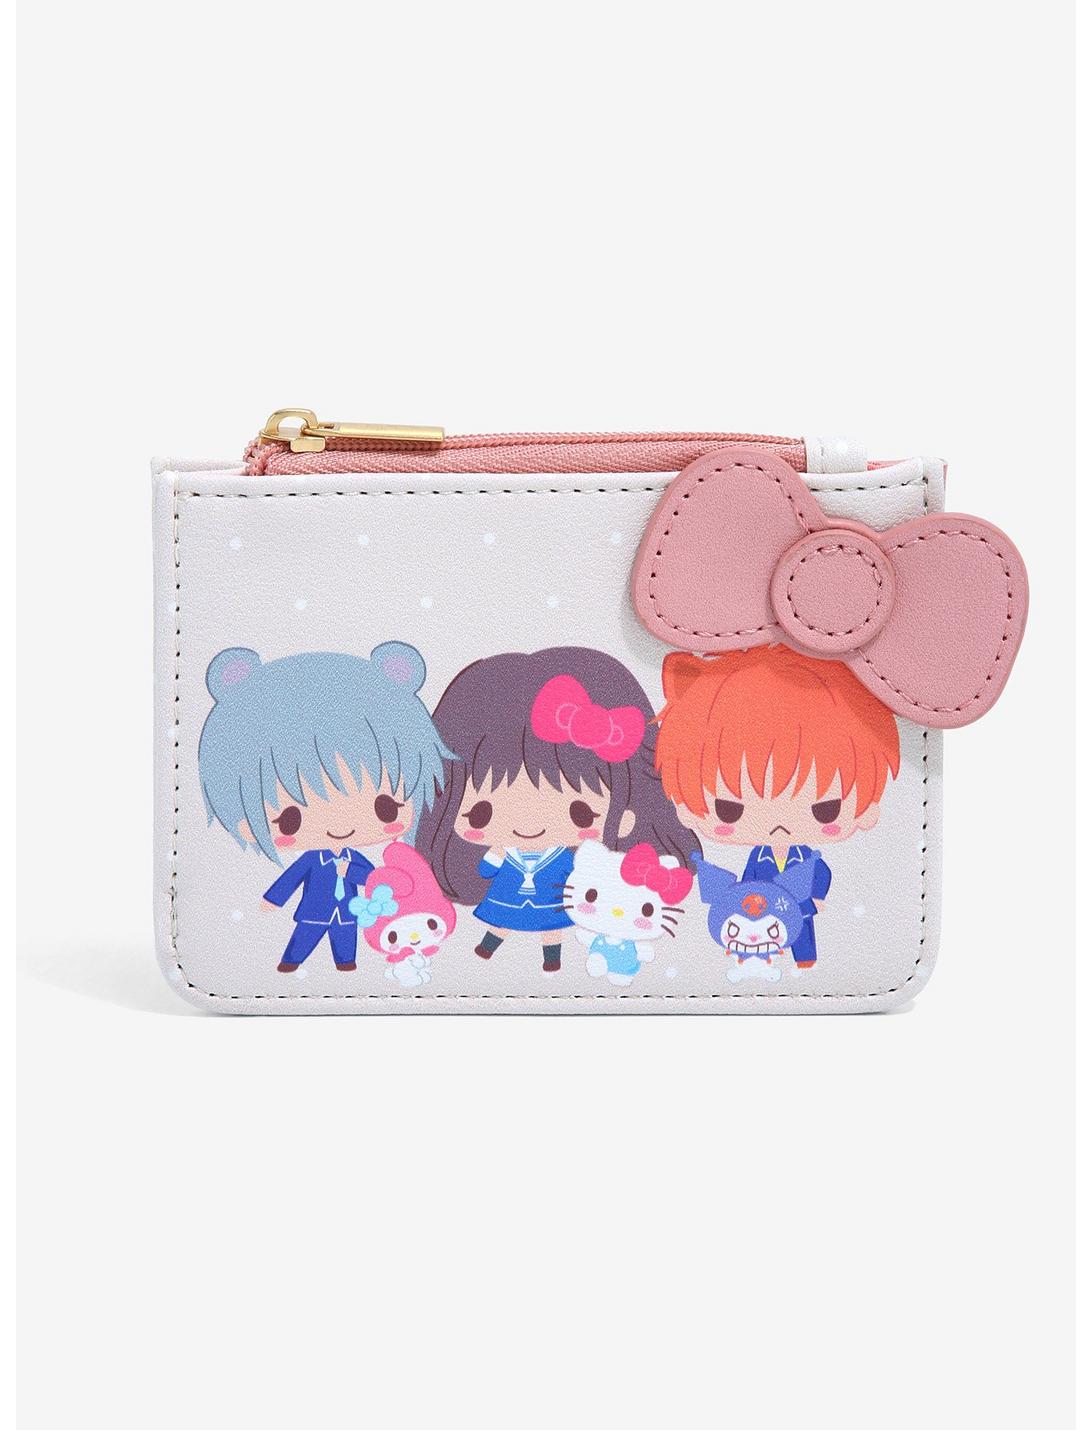 Fruits Basket x Hello Kitty and Friends Chibi Characters Cardholder - BoxLunch Exclusive, , hi-res